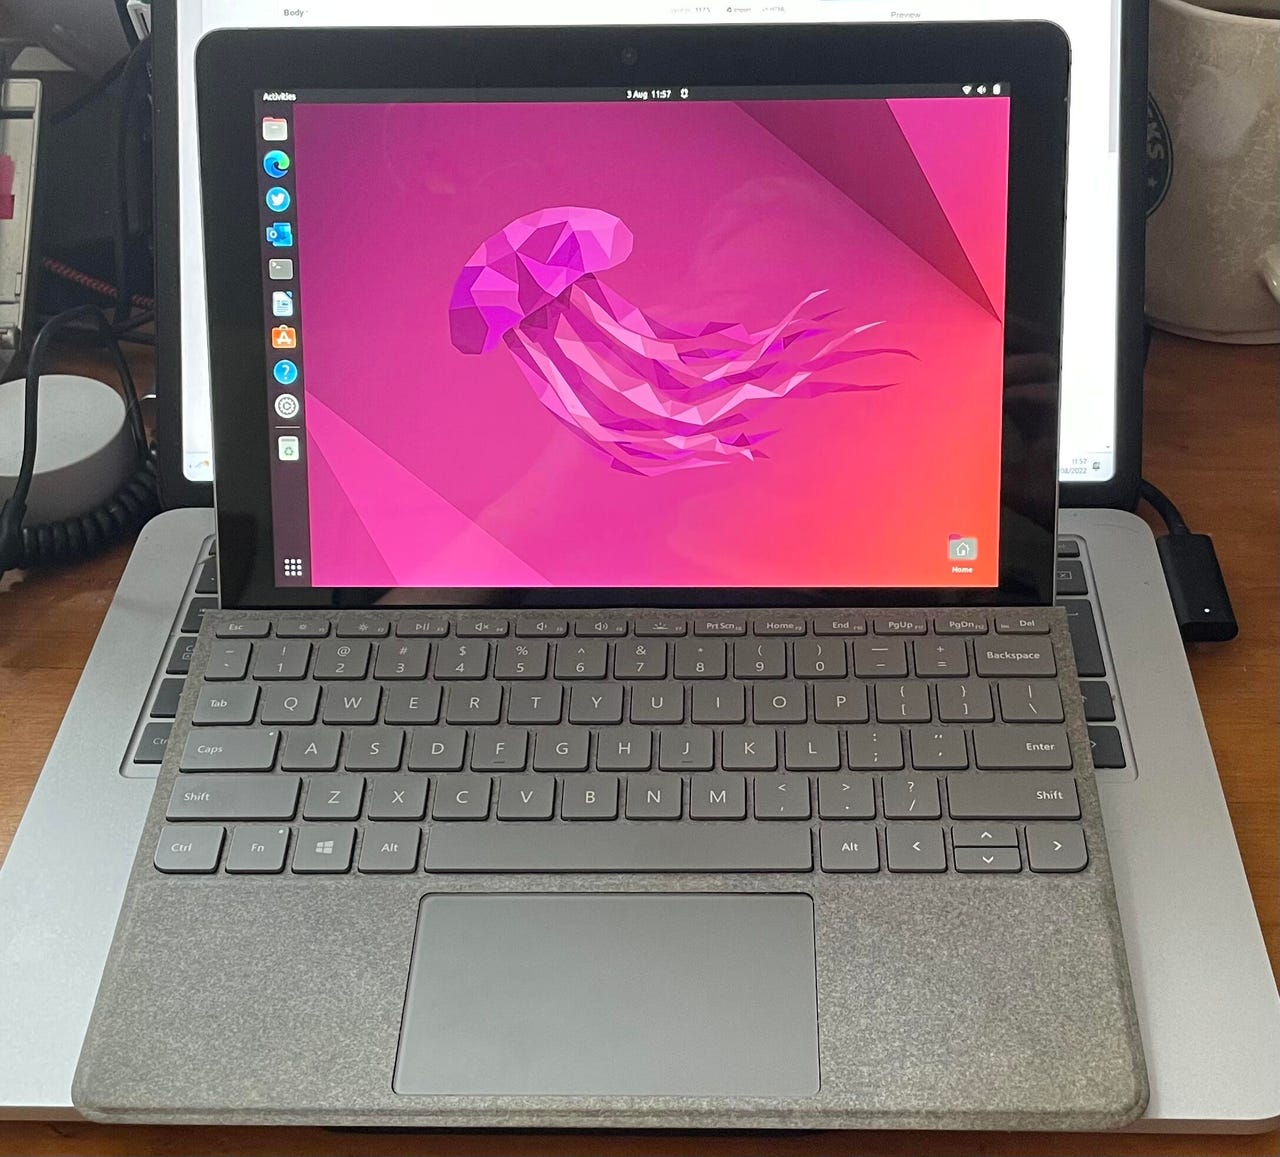 Ubuntu running on a Surface Go showing a stylized jellyfish on a pink screen